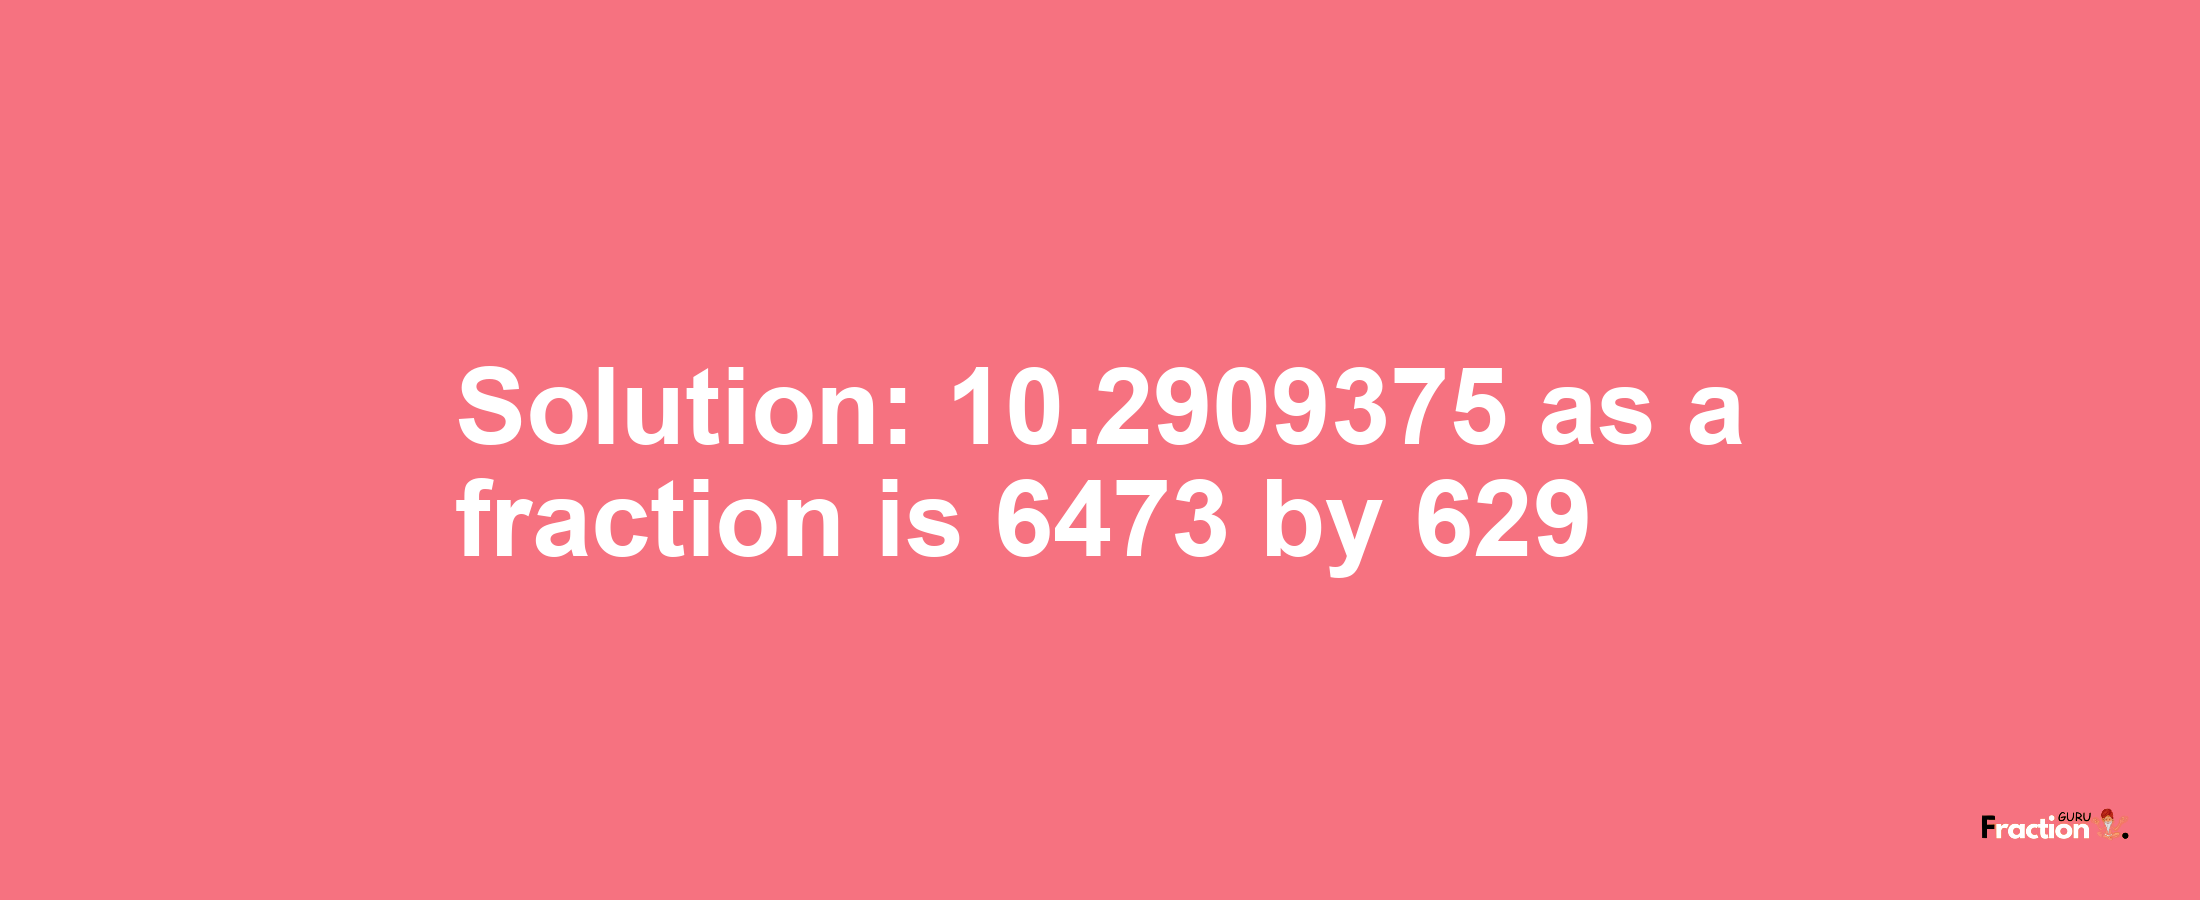 Solution:10.2909375 as a fraction is 6473/629